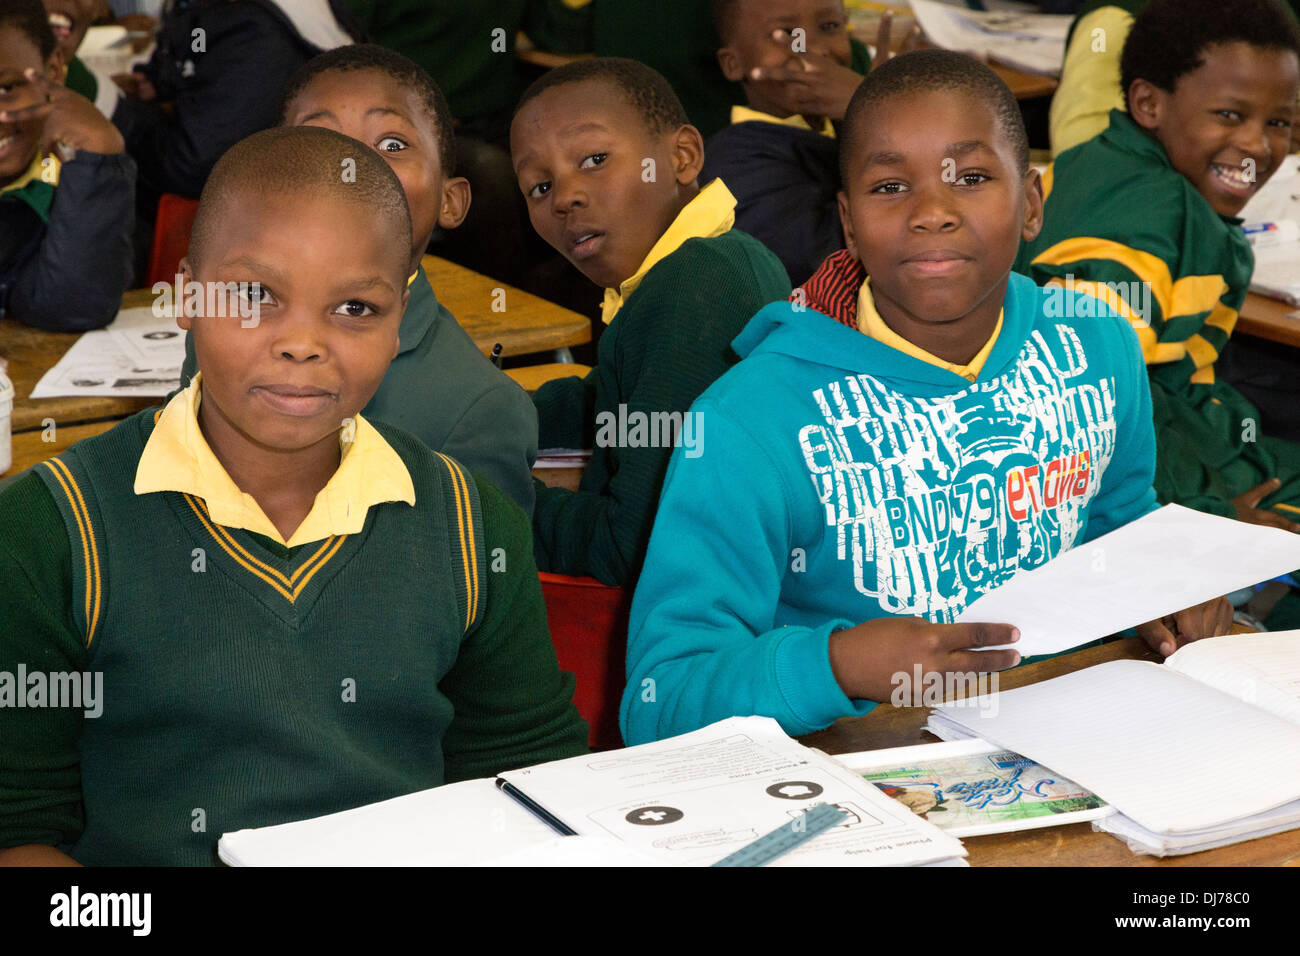 South Africa, Cape Town, Guguletu Township. Young Boys at Intshinga Primary School, mostly Xhosa Ethnic Group. Stock Photo